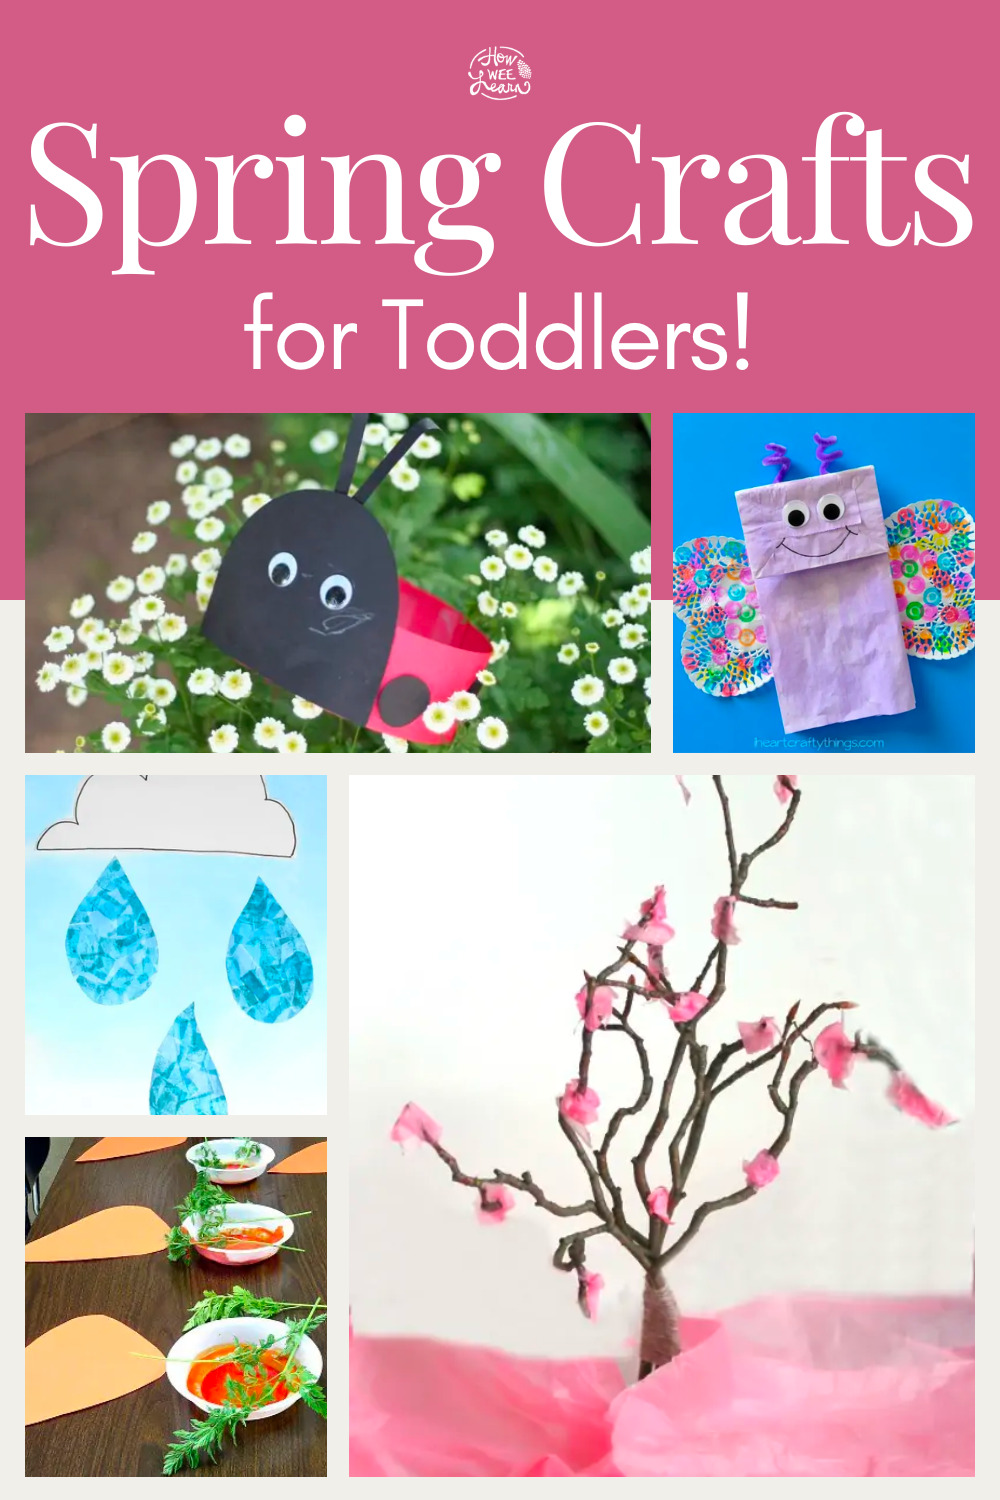 Spring Crafts for Toddlers!